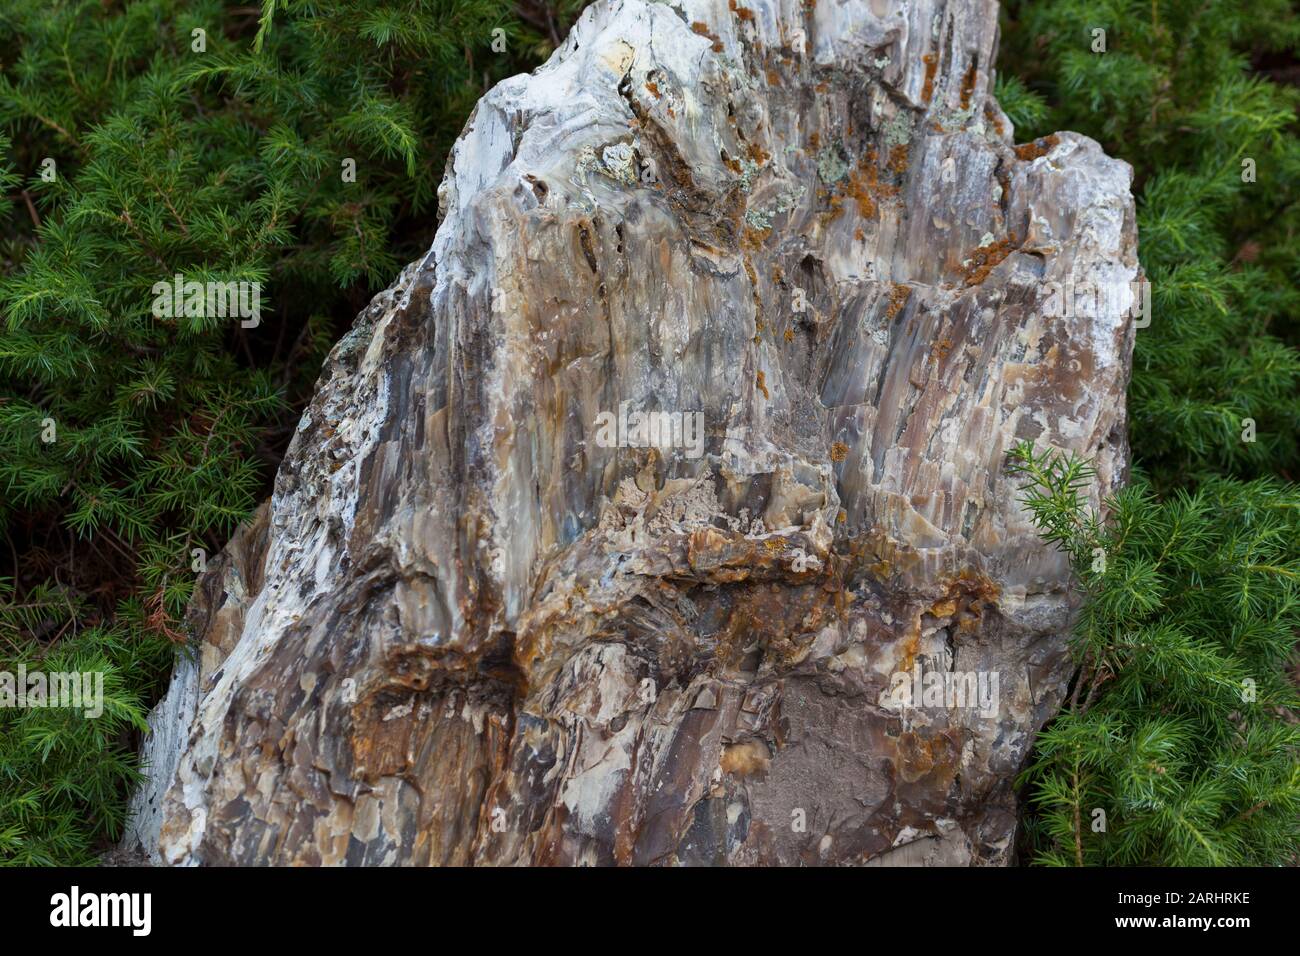 A very large piece of petrified wood that is millions of years old and still standing in the forest of the Black Hills of South Dakota. Stock Photo